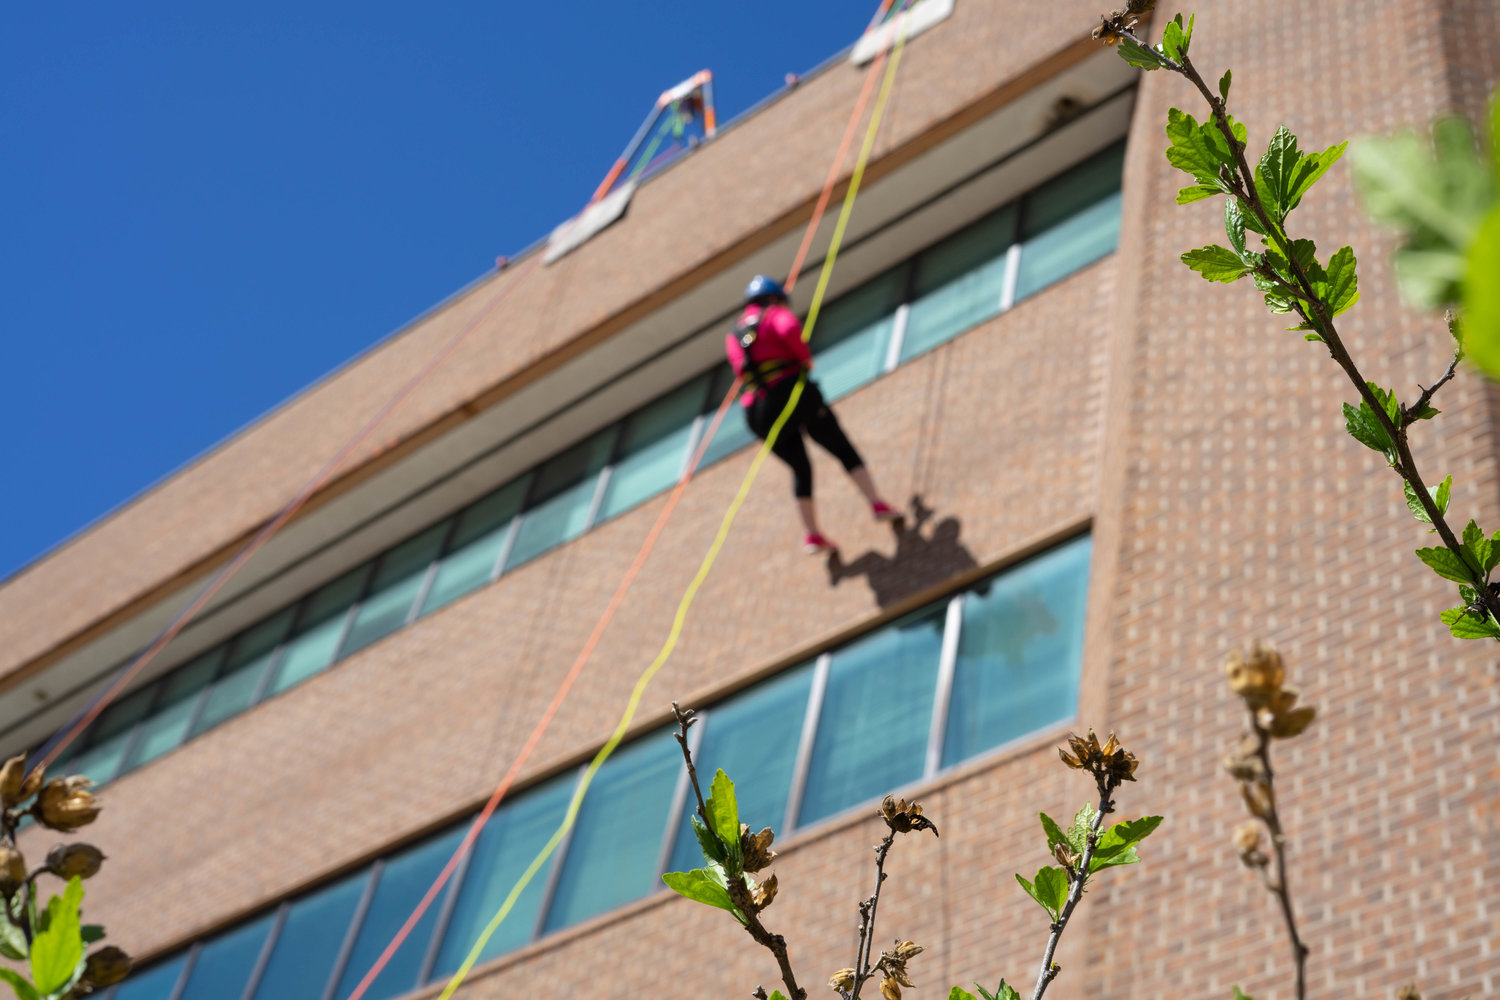 A volunteer slowly rappels down the building at United Way's Over the Edge fundraiser.